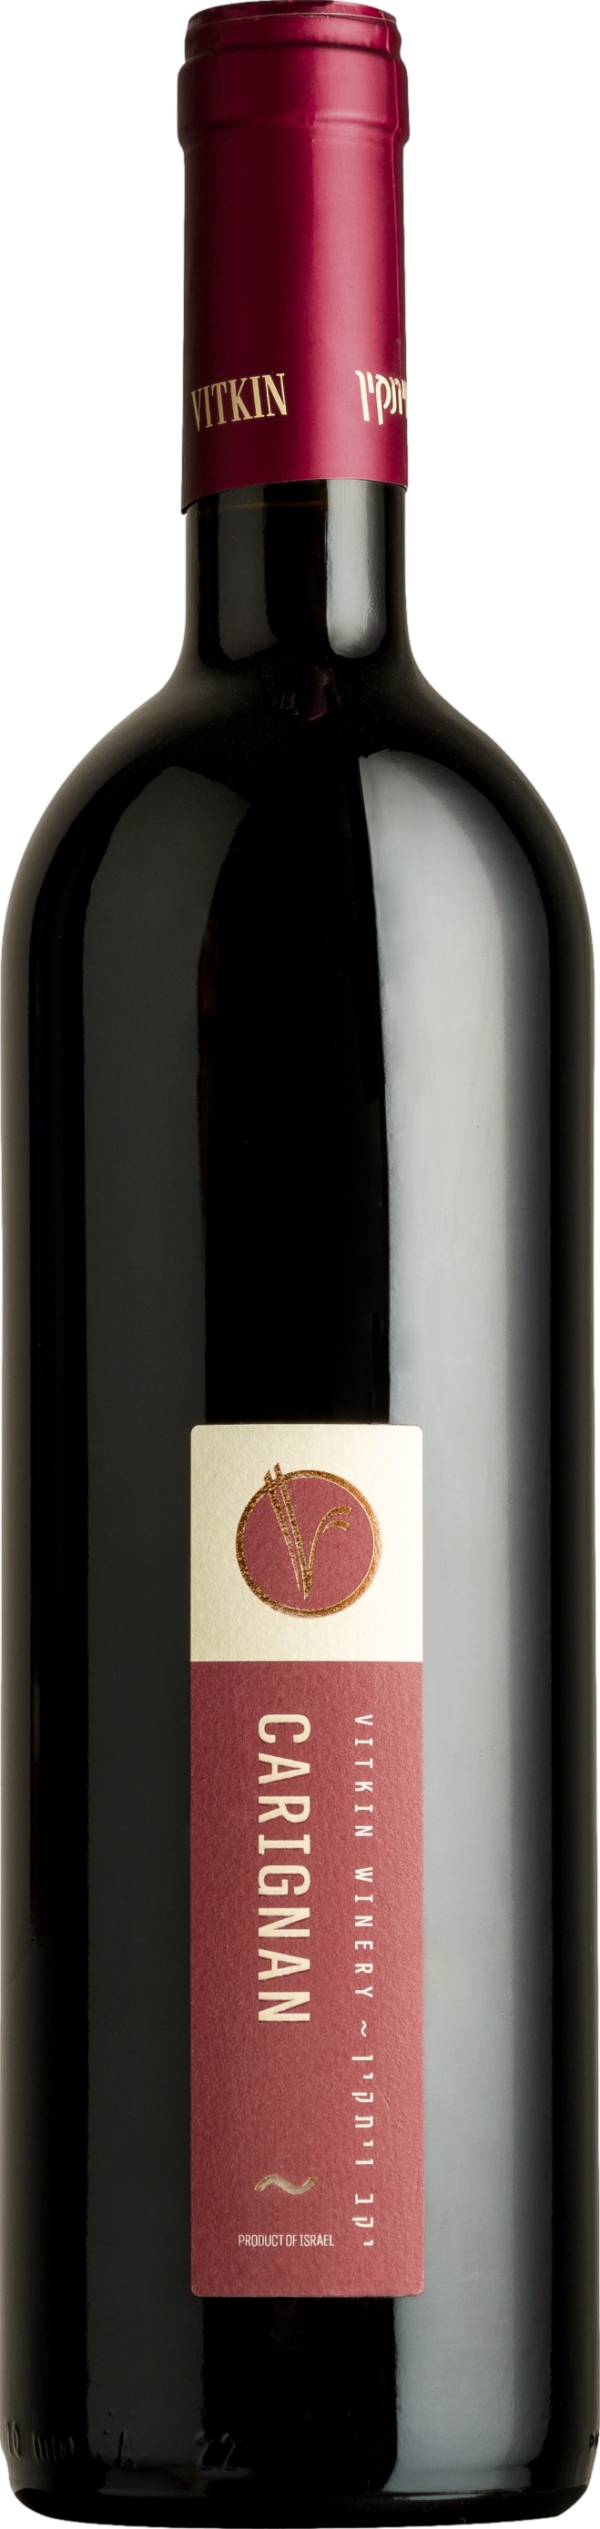 Product image of Vitkin Carignan 2019 from 8wines